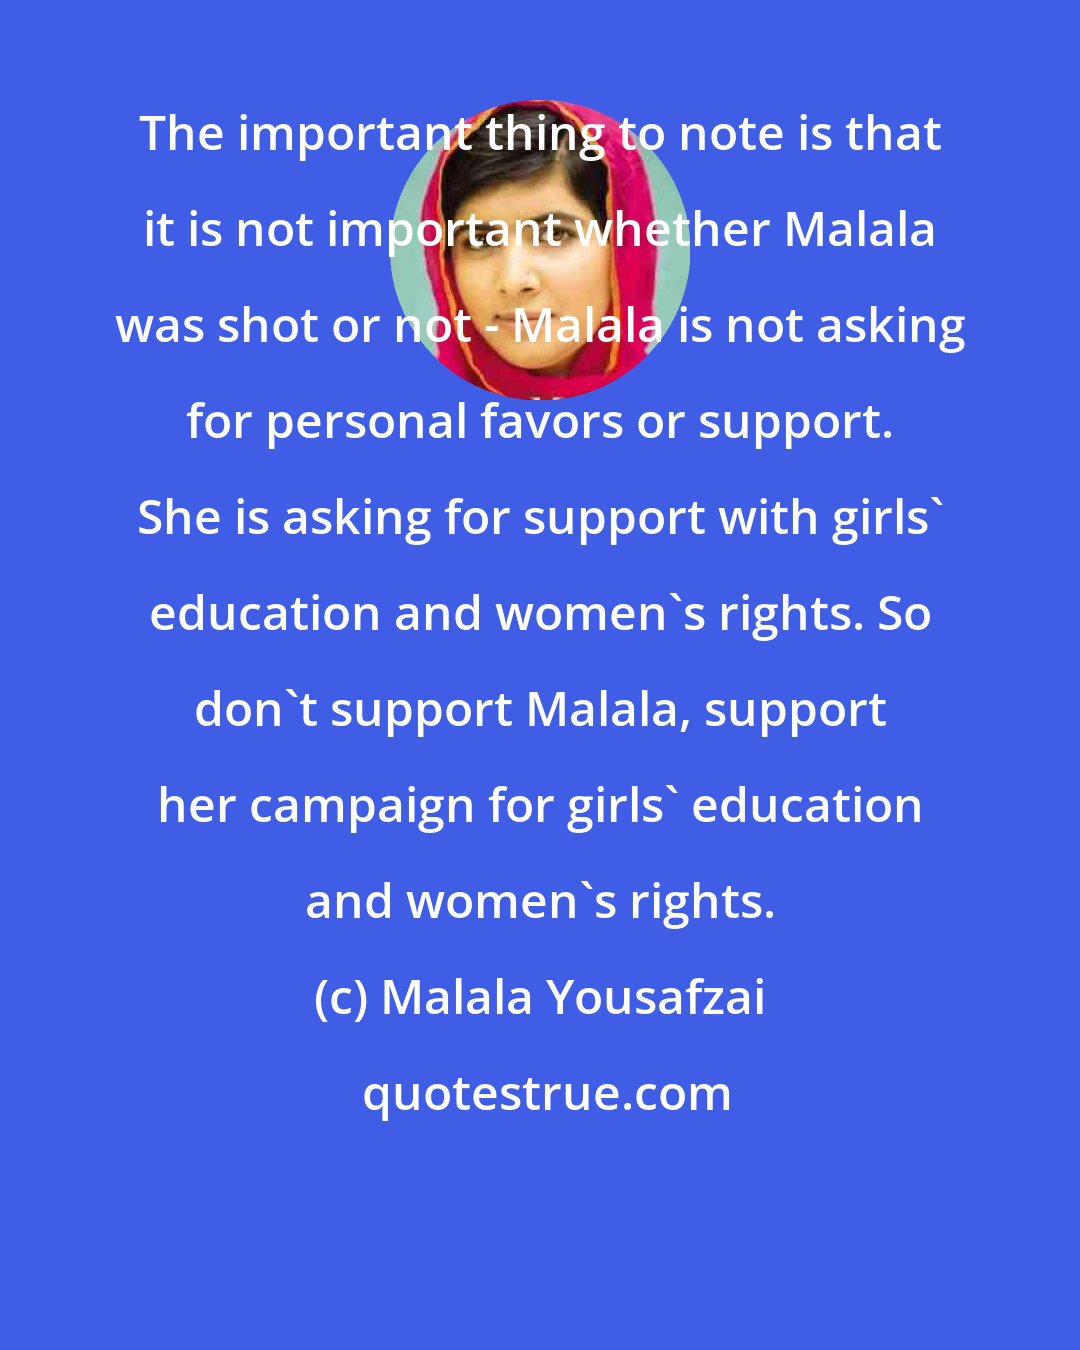 Malala Yousafzai: The important thing to note is that it is not important whether Malala was shot or not - Malala is not asking for personal favors or support. She is asking for support with girls' education and women's rights. So don't support Malala, support her campaign for girls' education and women's rights.